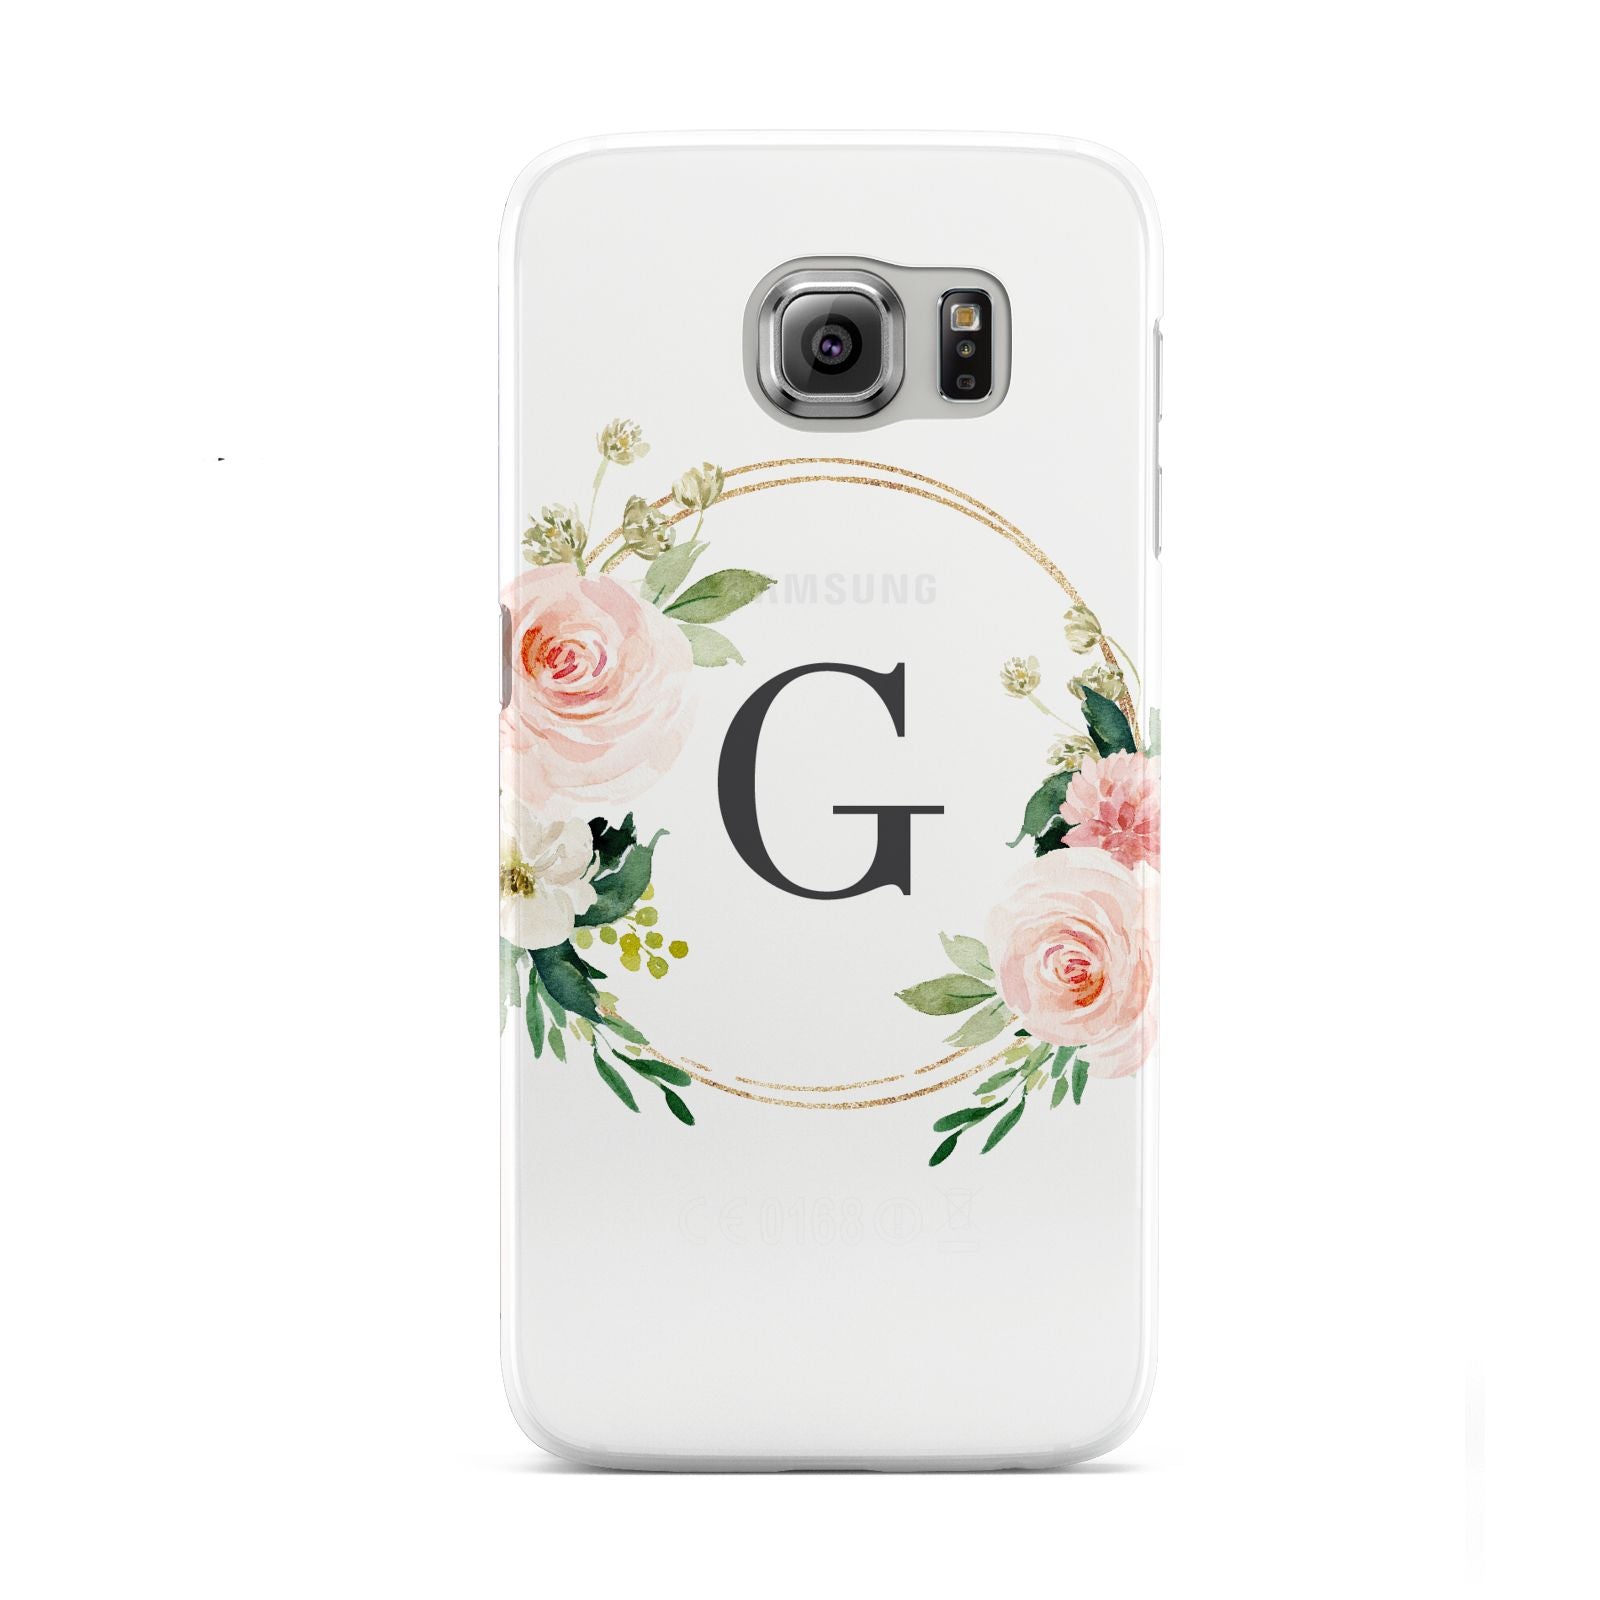 Personalised Blush Floral Wreath Samsung Galaxy S6 Case